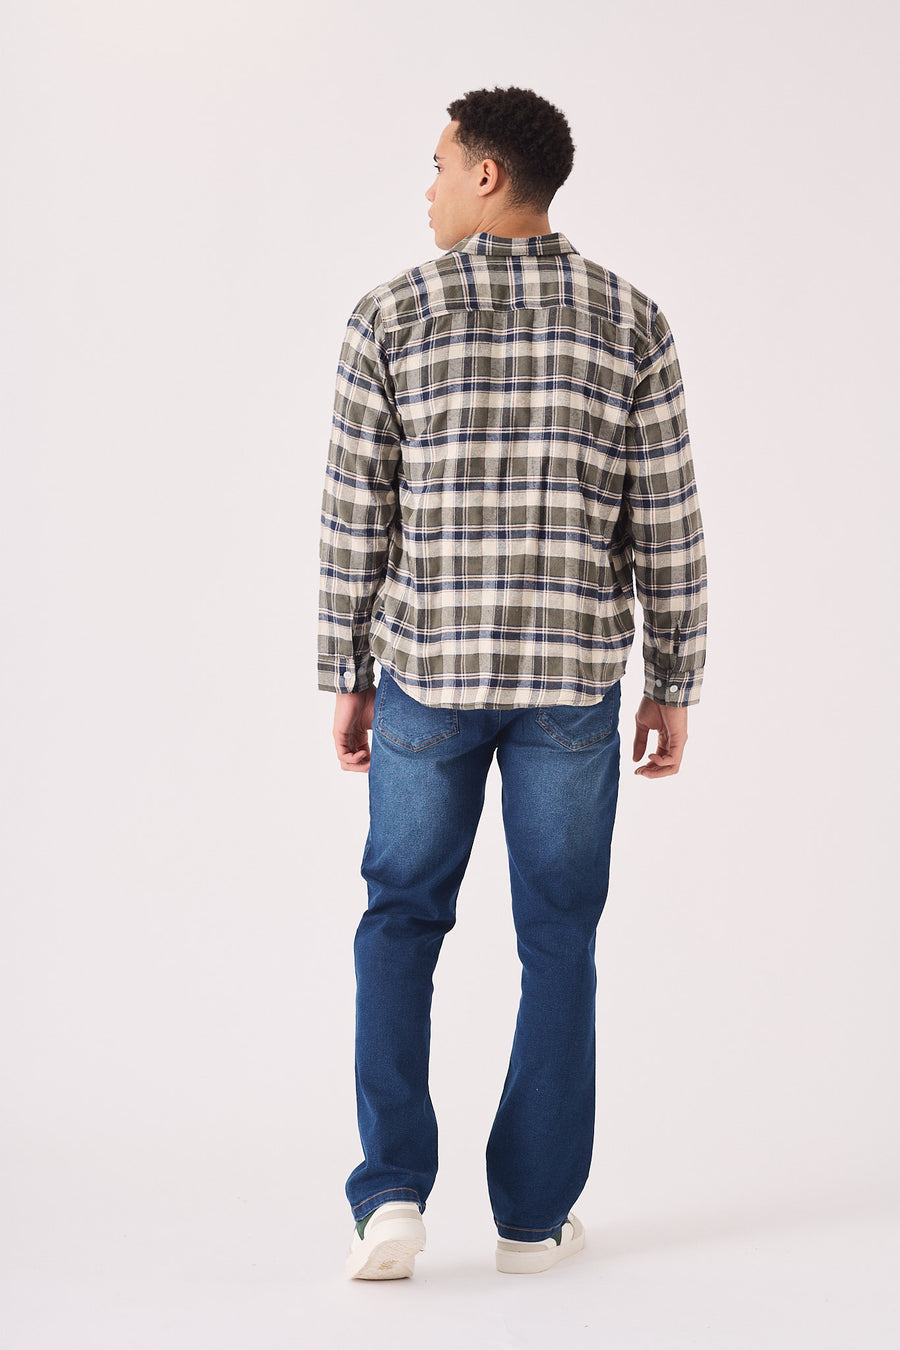 PLAID FLANNEL CHECK SHIRT - OLIVE GREEN, NAVY AND WHITE